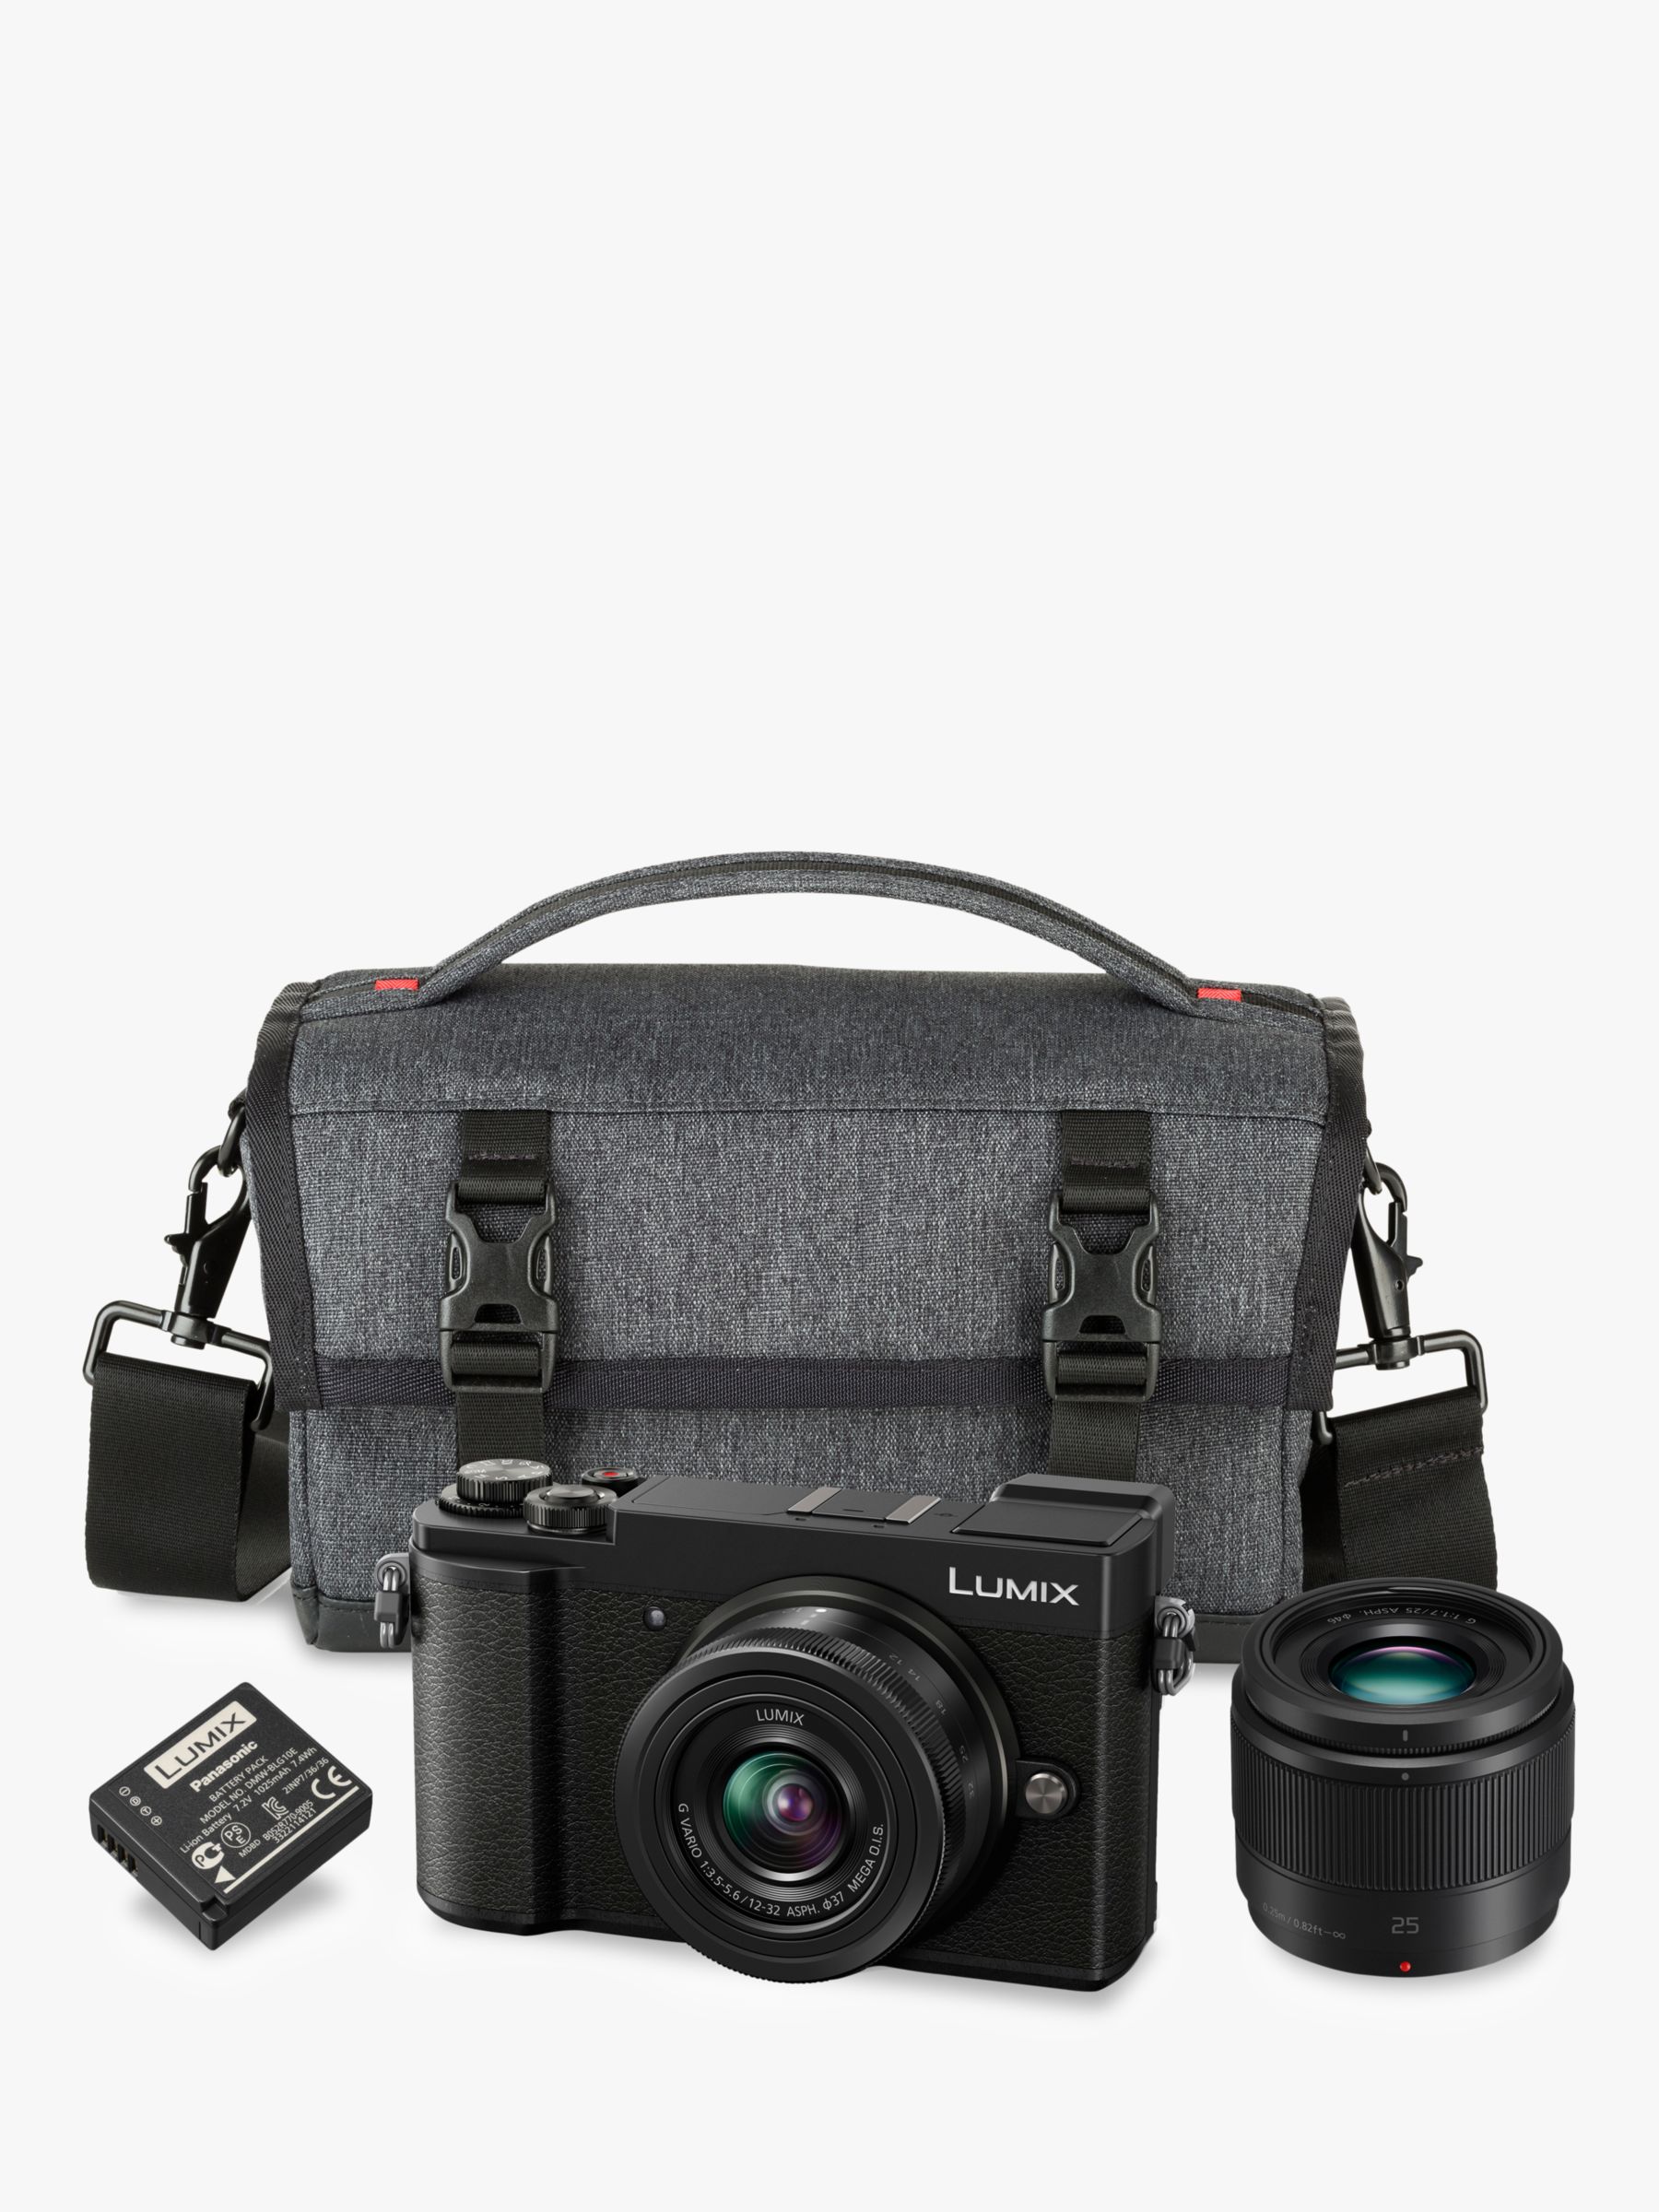 Image of Panasonic Lumix DCGX9 Compact System Camera with 1232mm IS Lens and 25mm Lens 3x Optical Zoom 4K Ultra HD 203MP WiFi Bluetooth Tiltable EVF 3 Tiltable Touch Screen Black Double Lens Kit with Camera Bag and Battery